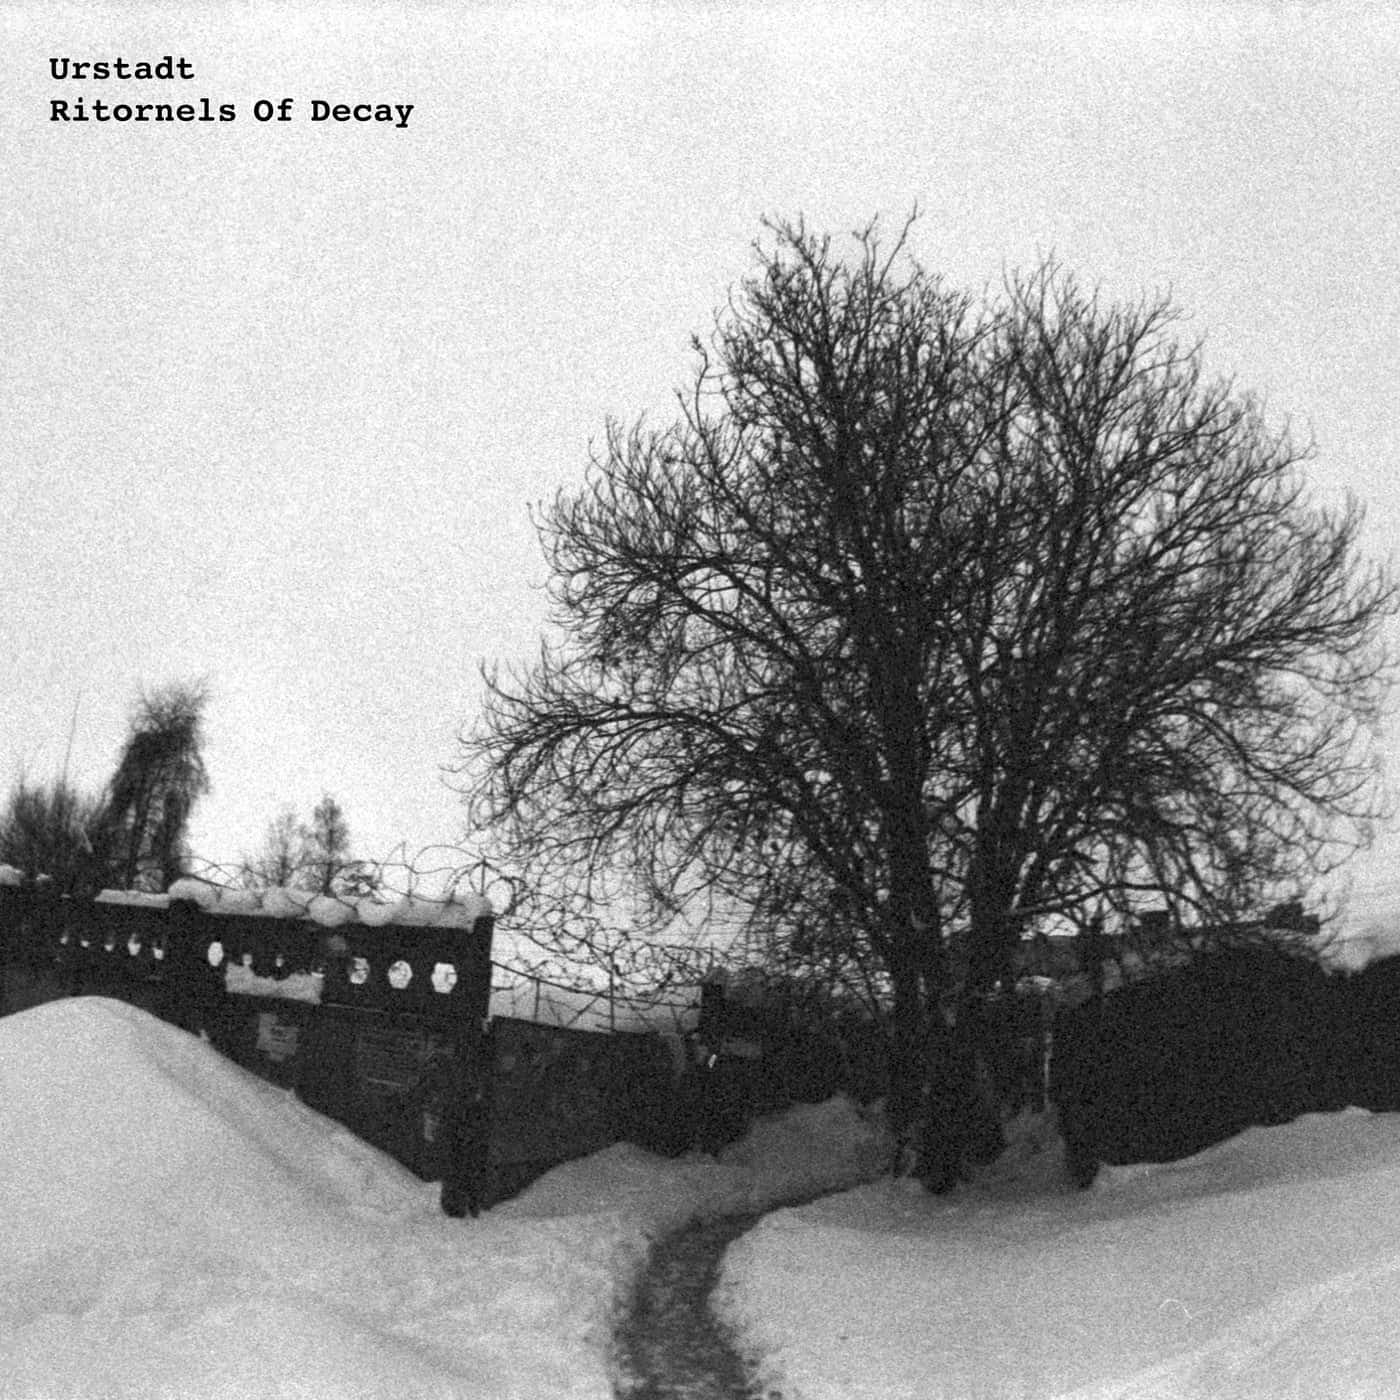 Download Urstadt - Ritornels Of Decay on Electrobuzz